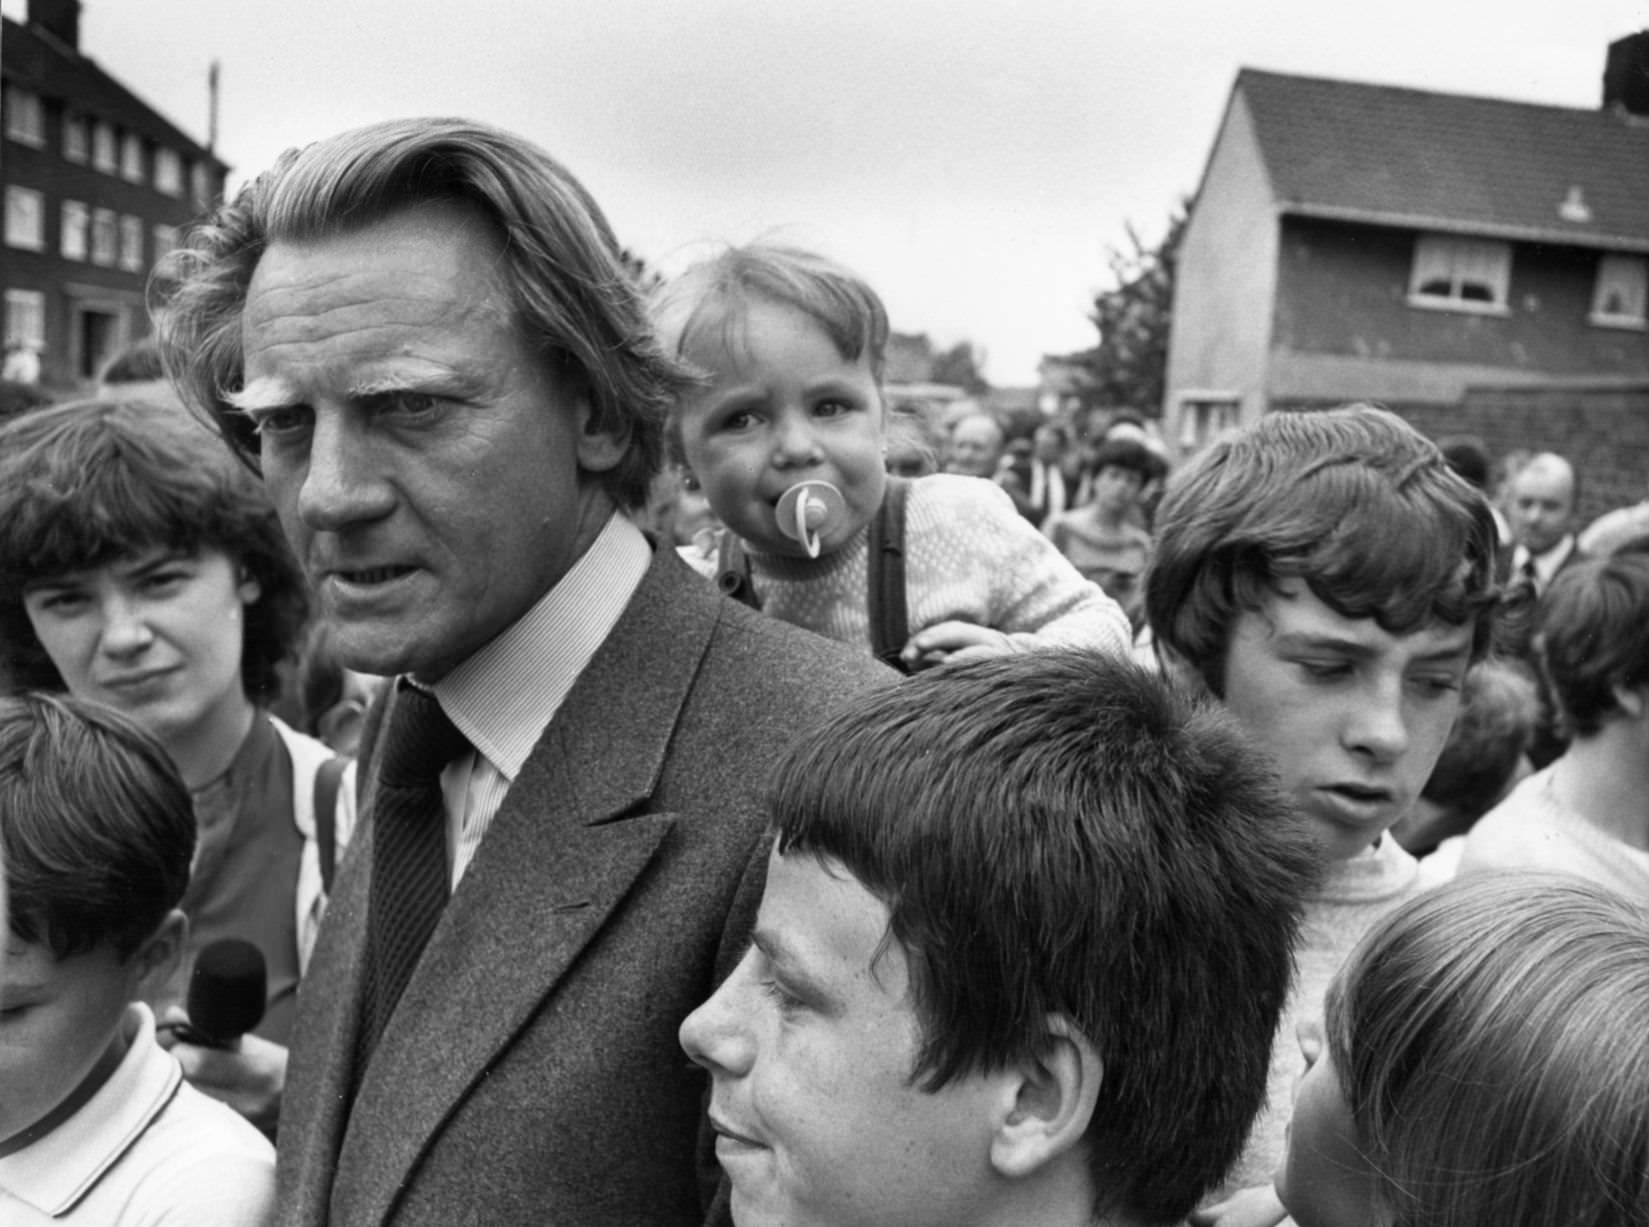 Michael Heseltine Secretary of State for the Environment seen here touring Toxteth following the riots, 25th July 1981.